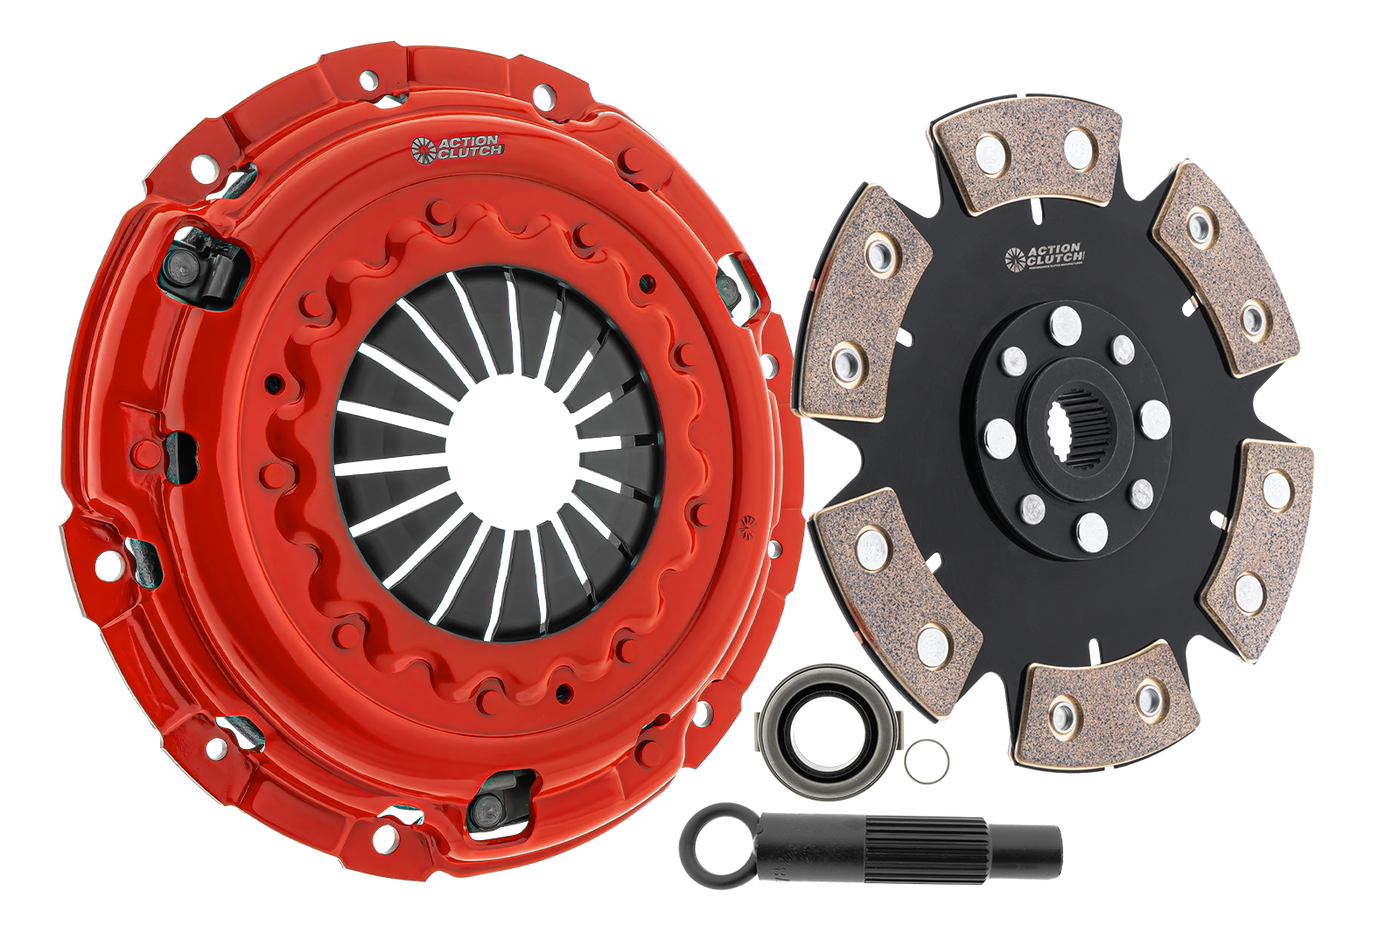 Stage 6 Clutch Kit (2MD) for Mitsubishi Mirage 1985-2002 1.5L SOHC (4G31) Non-Turbo FWD